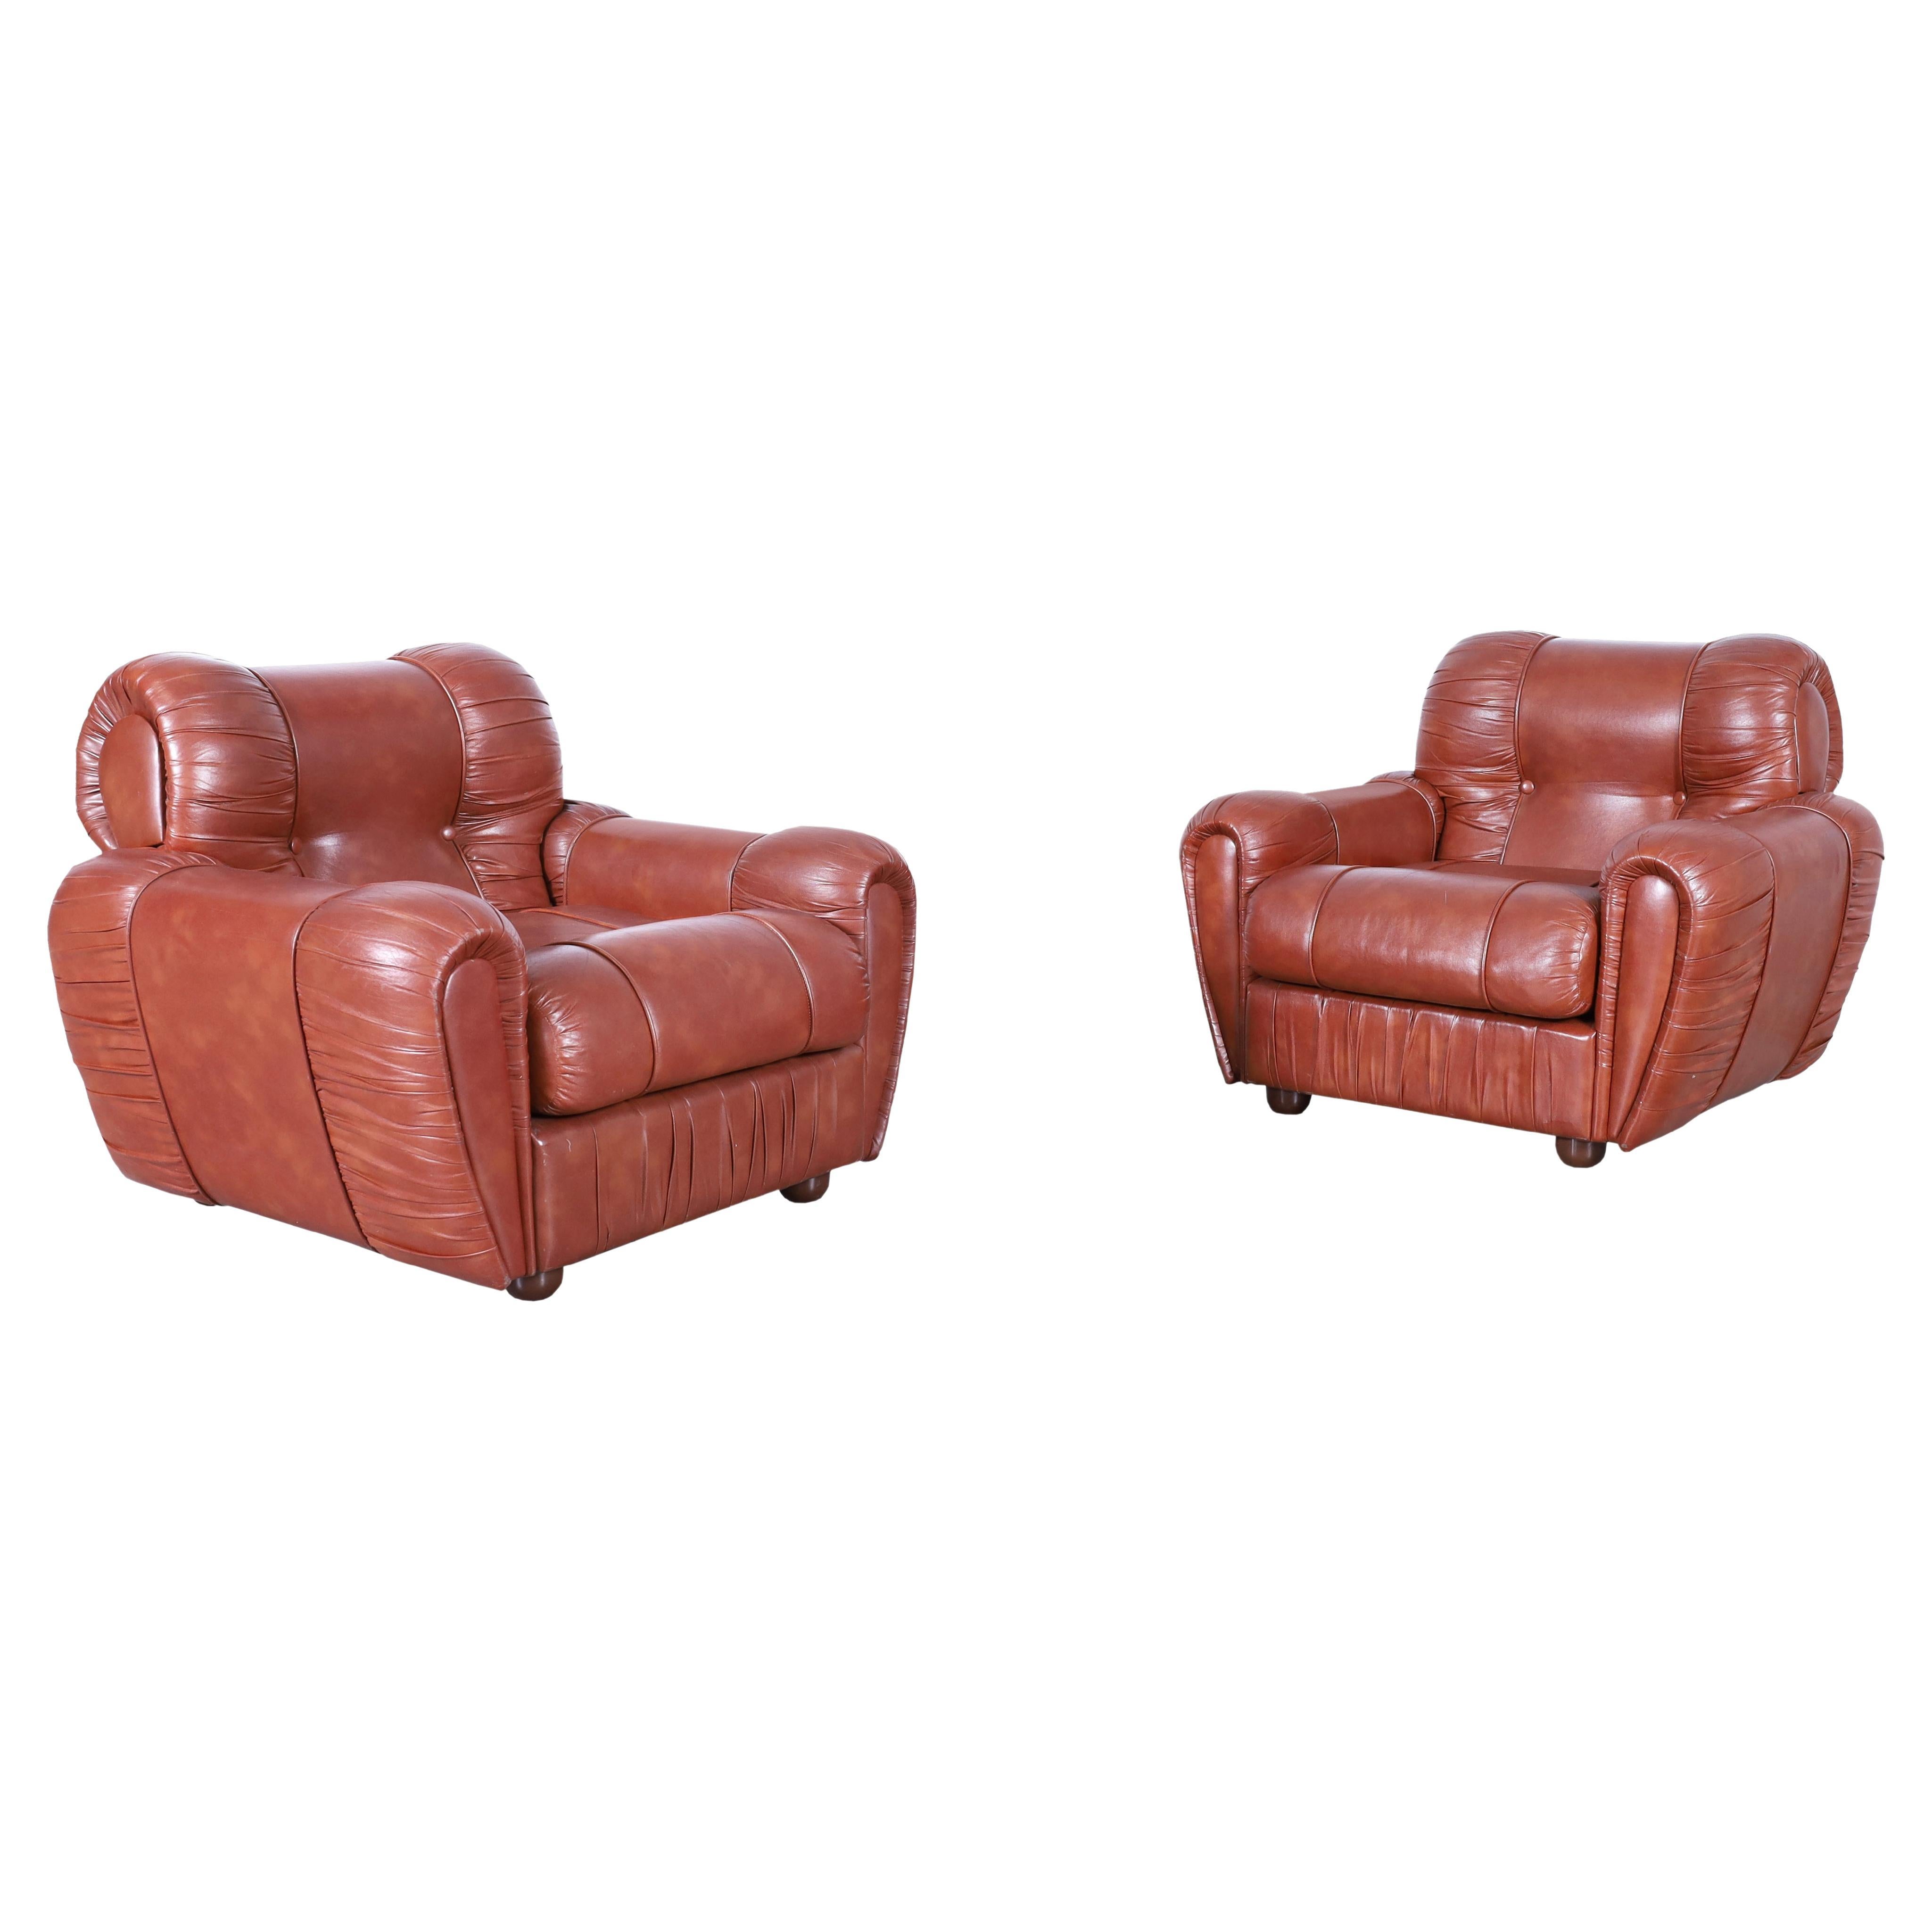 Vintage Italian Leatherette Lounge Chairs For Sale